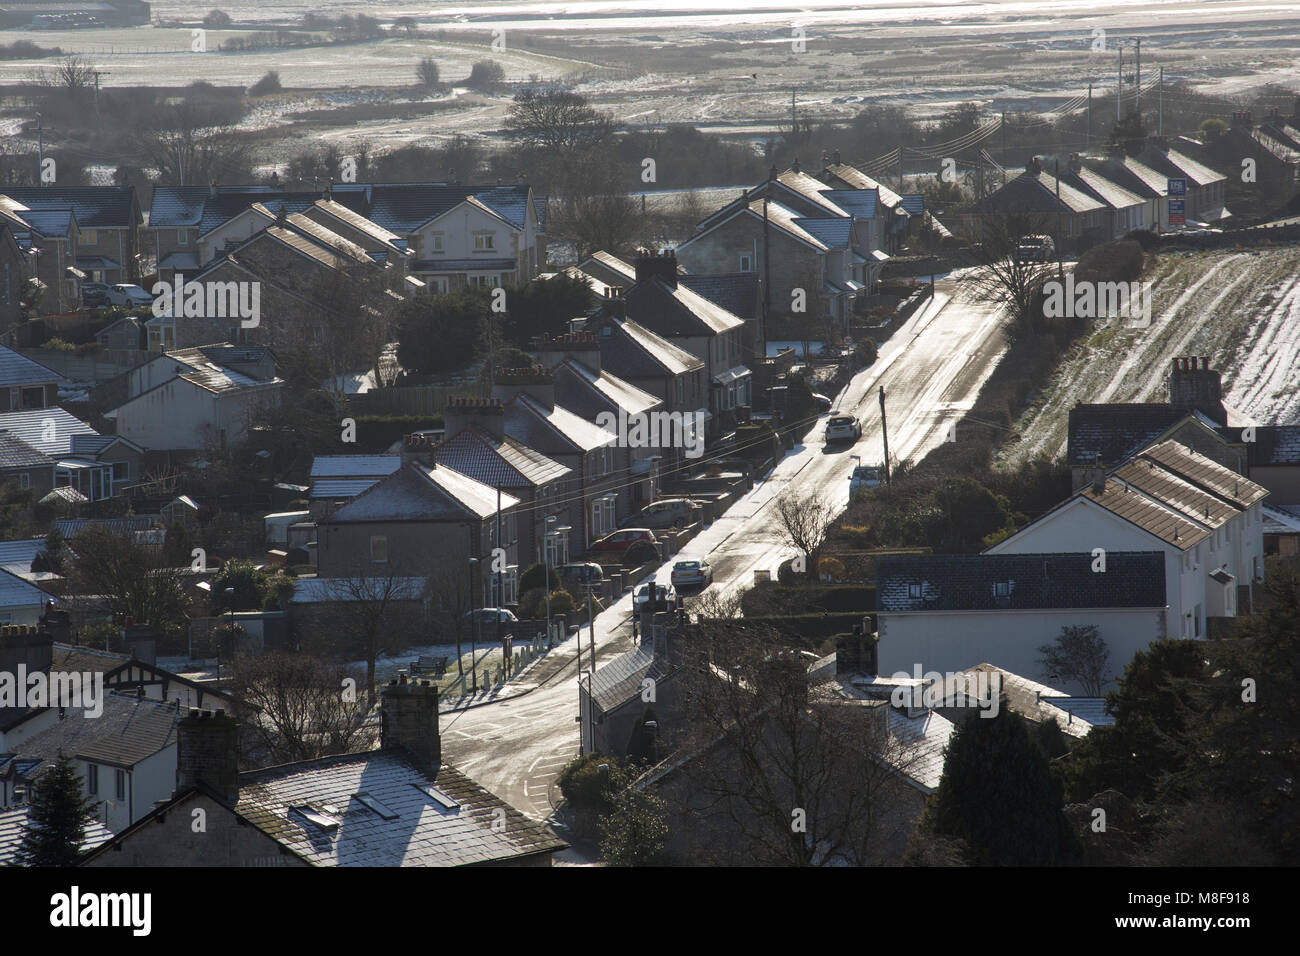 Housing on the outskirts of Warton, Lancashire Uk during the beast from the east freezing weather Stock Photo